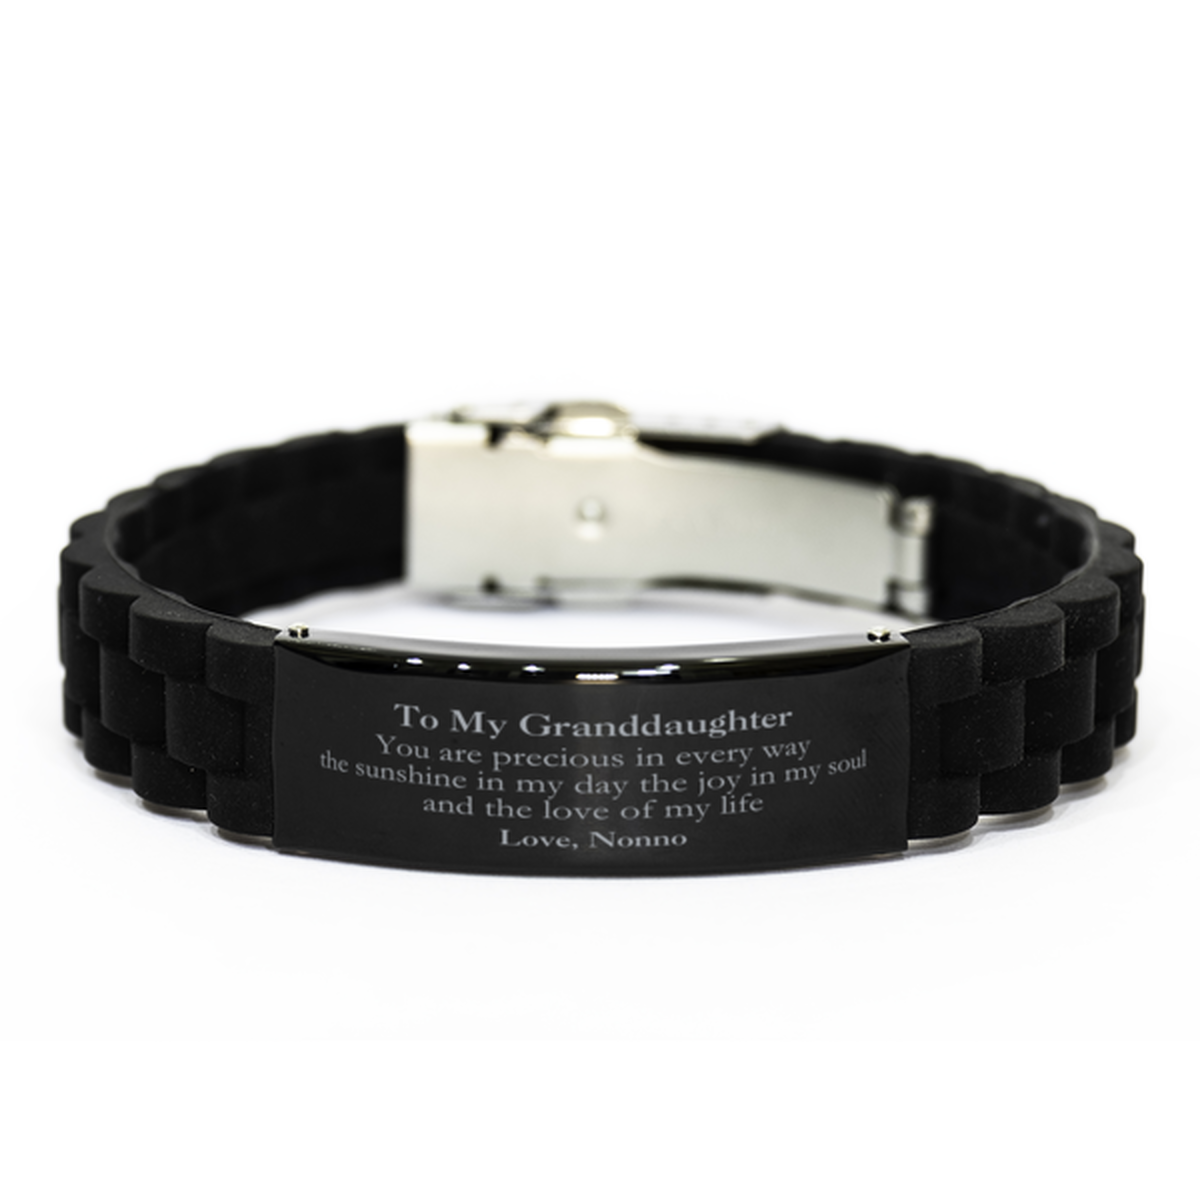 Graduation Gifts for Granddaughter Black Glidelock Clasp Bracelet Present from Nonno, Christmas Granddaughter Birthday Gifts Granddaughter You are precious in every way the sunshine in my day. Love, Nonno